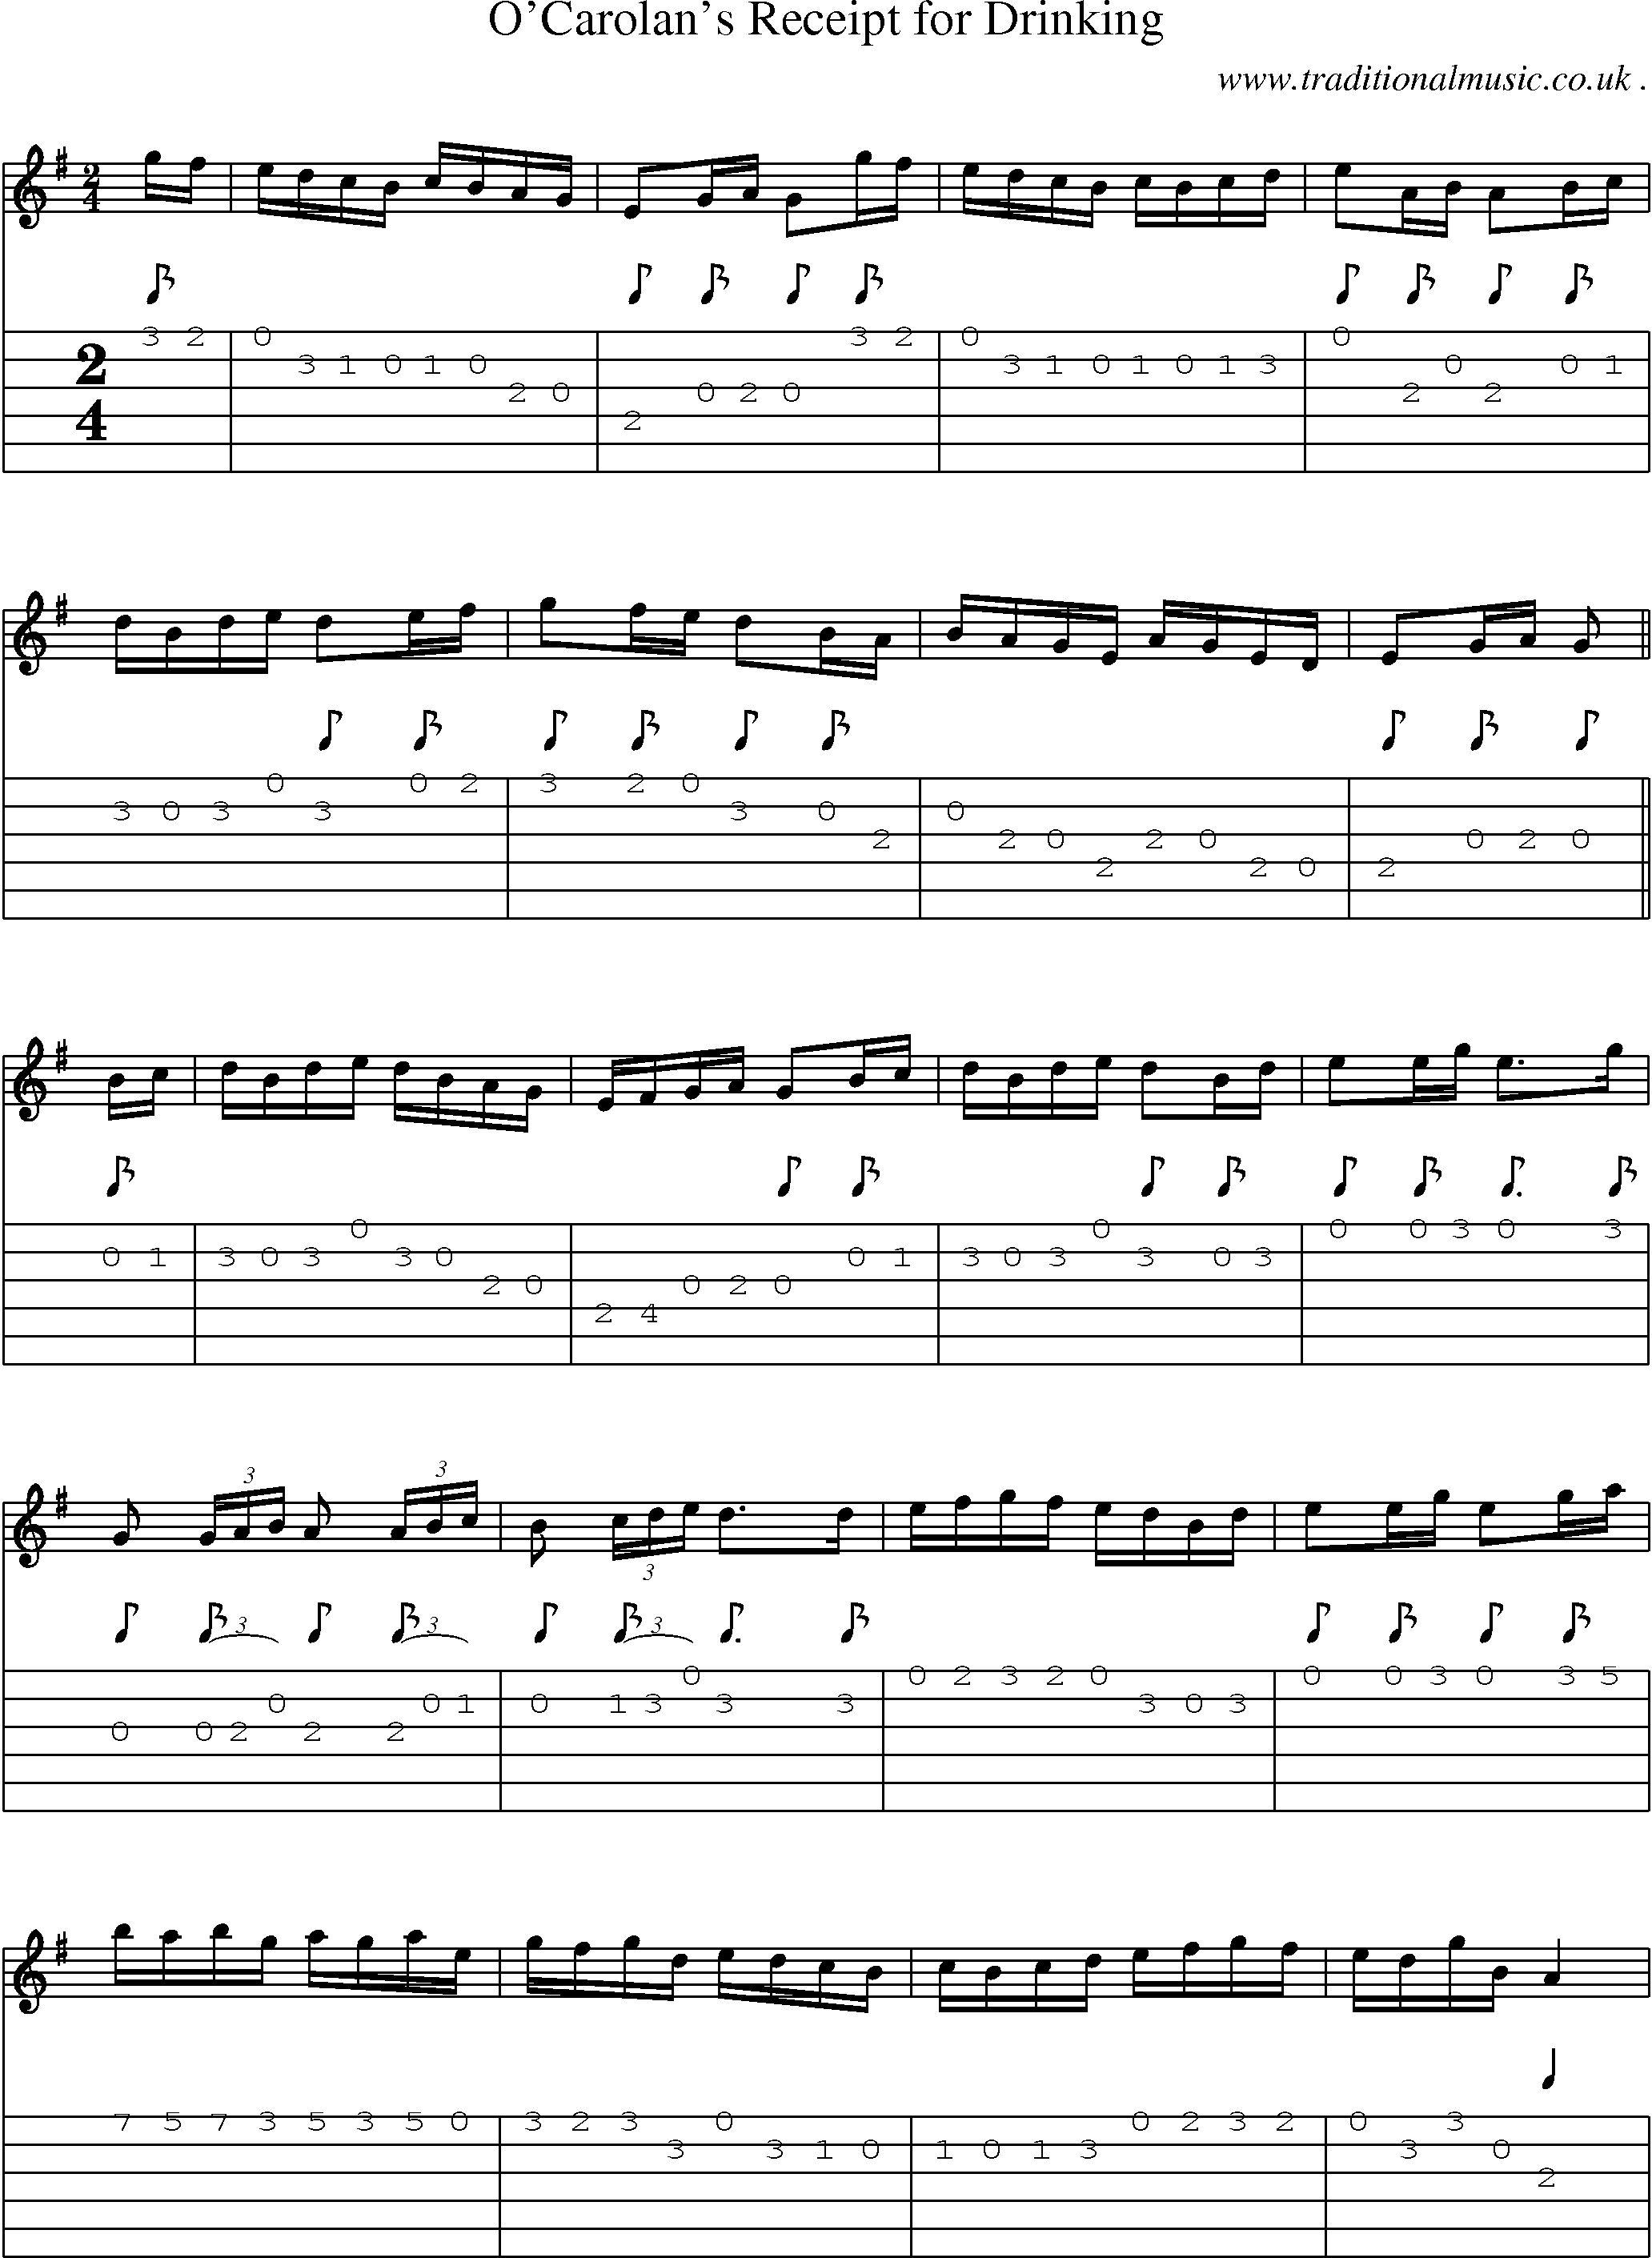 Sheet-Music and Guitar Tabs for Ocarolans Receipt For Drinking